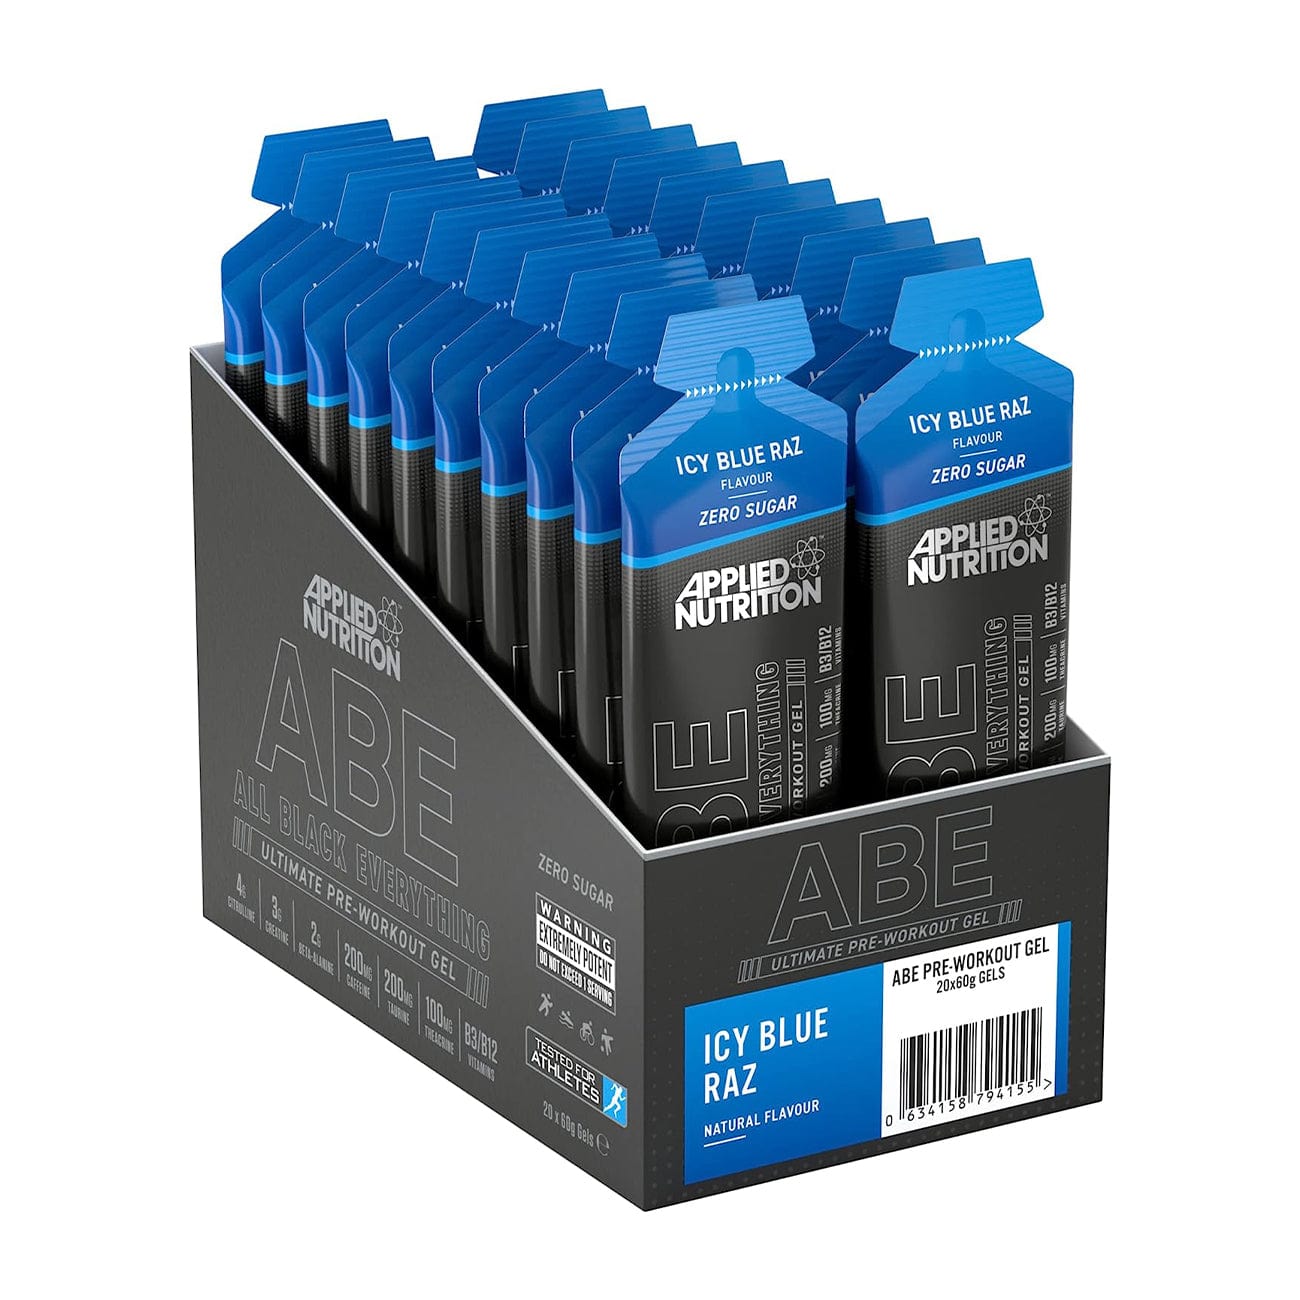 Applied Nutrition Supplement Box of 20 / Icy Blue Raz ABE - All Black Everything Pre-Workout Gel XMiles